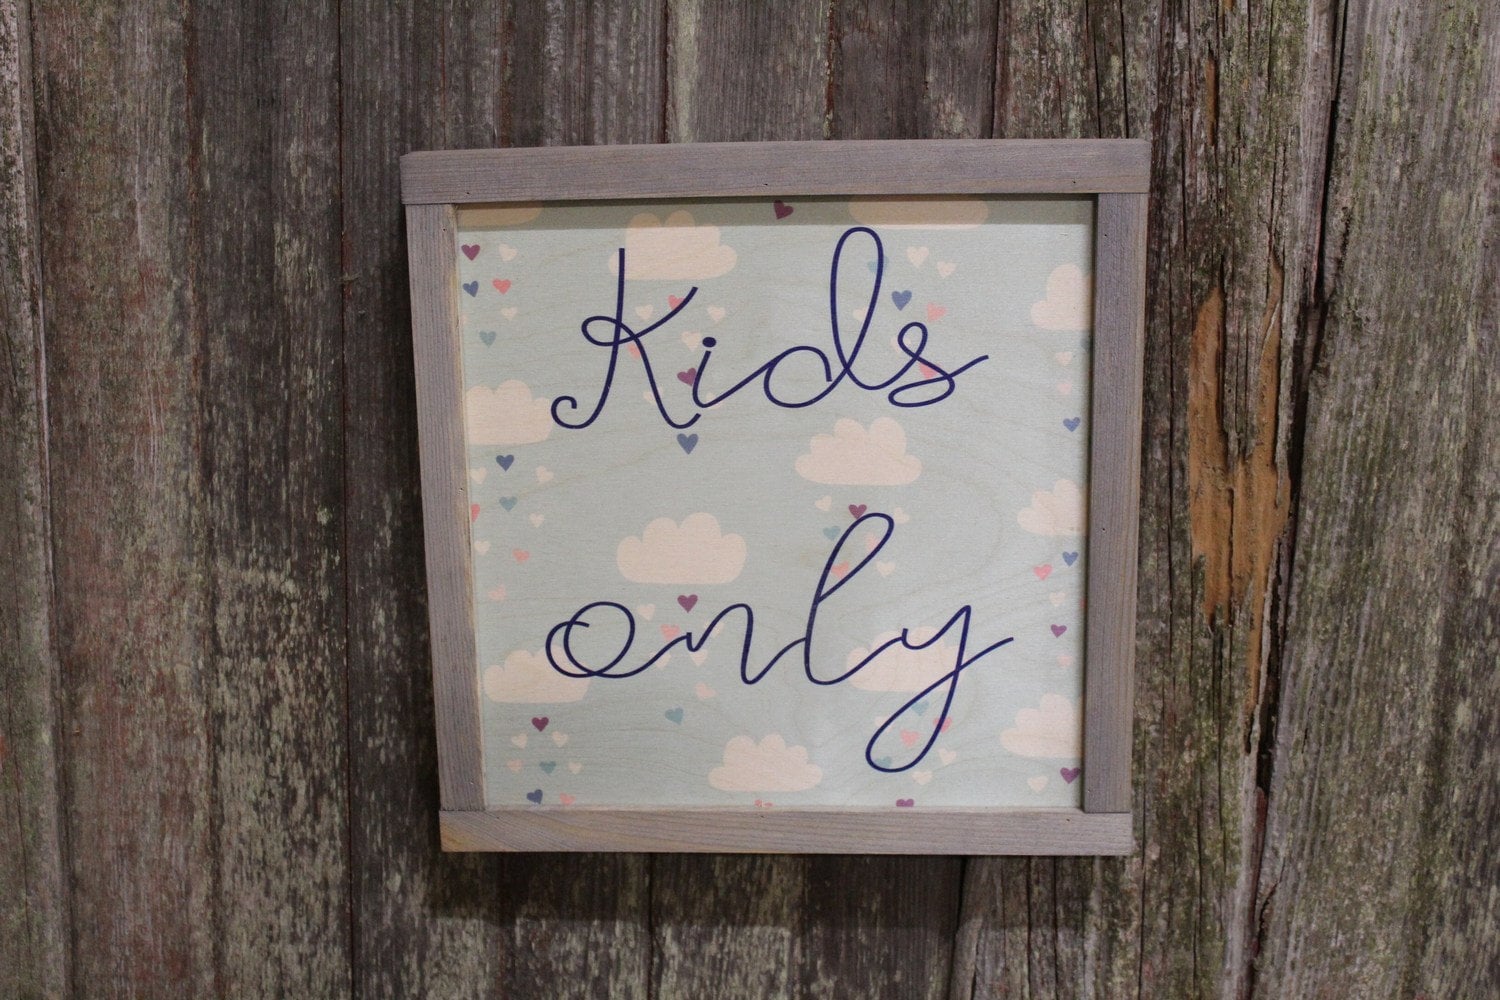 Kids Only Wood Sign Club House Room Play Room Sign Gray Framed Print Clouds Wall Art Farmhouse Primitive Rustic Decoration Decor